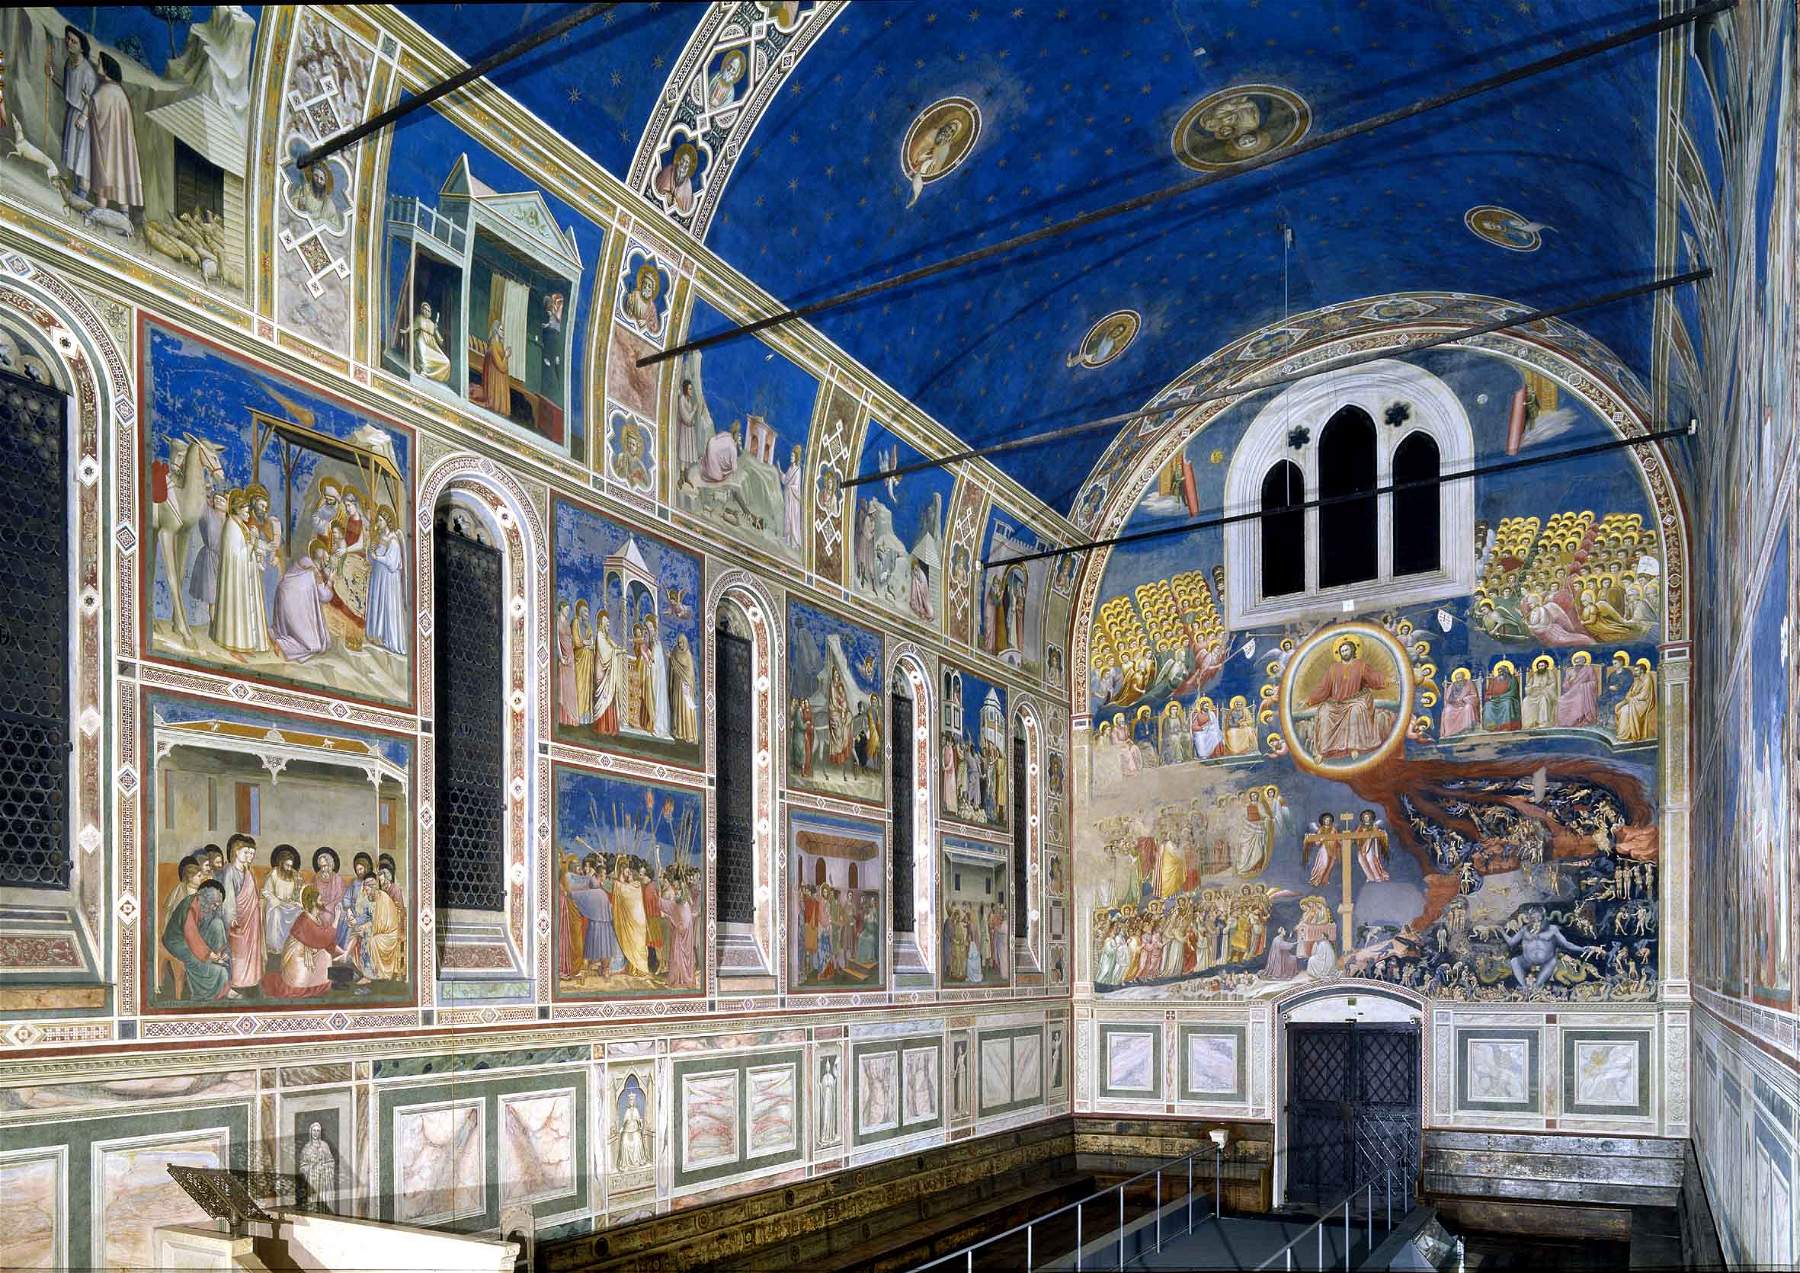 Giotto, life and works of the artist who 